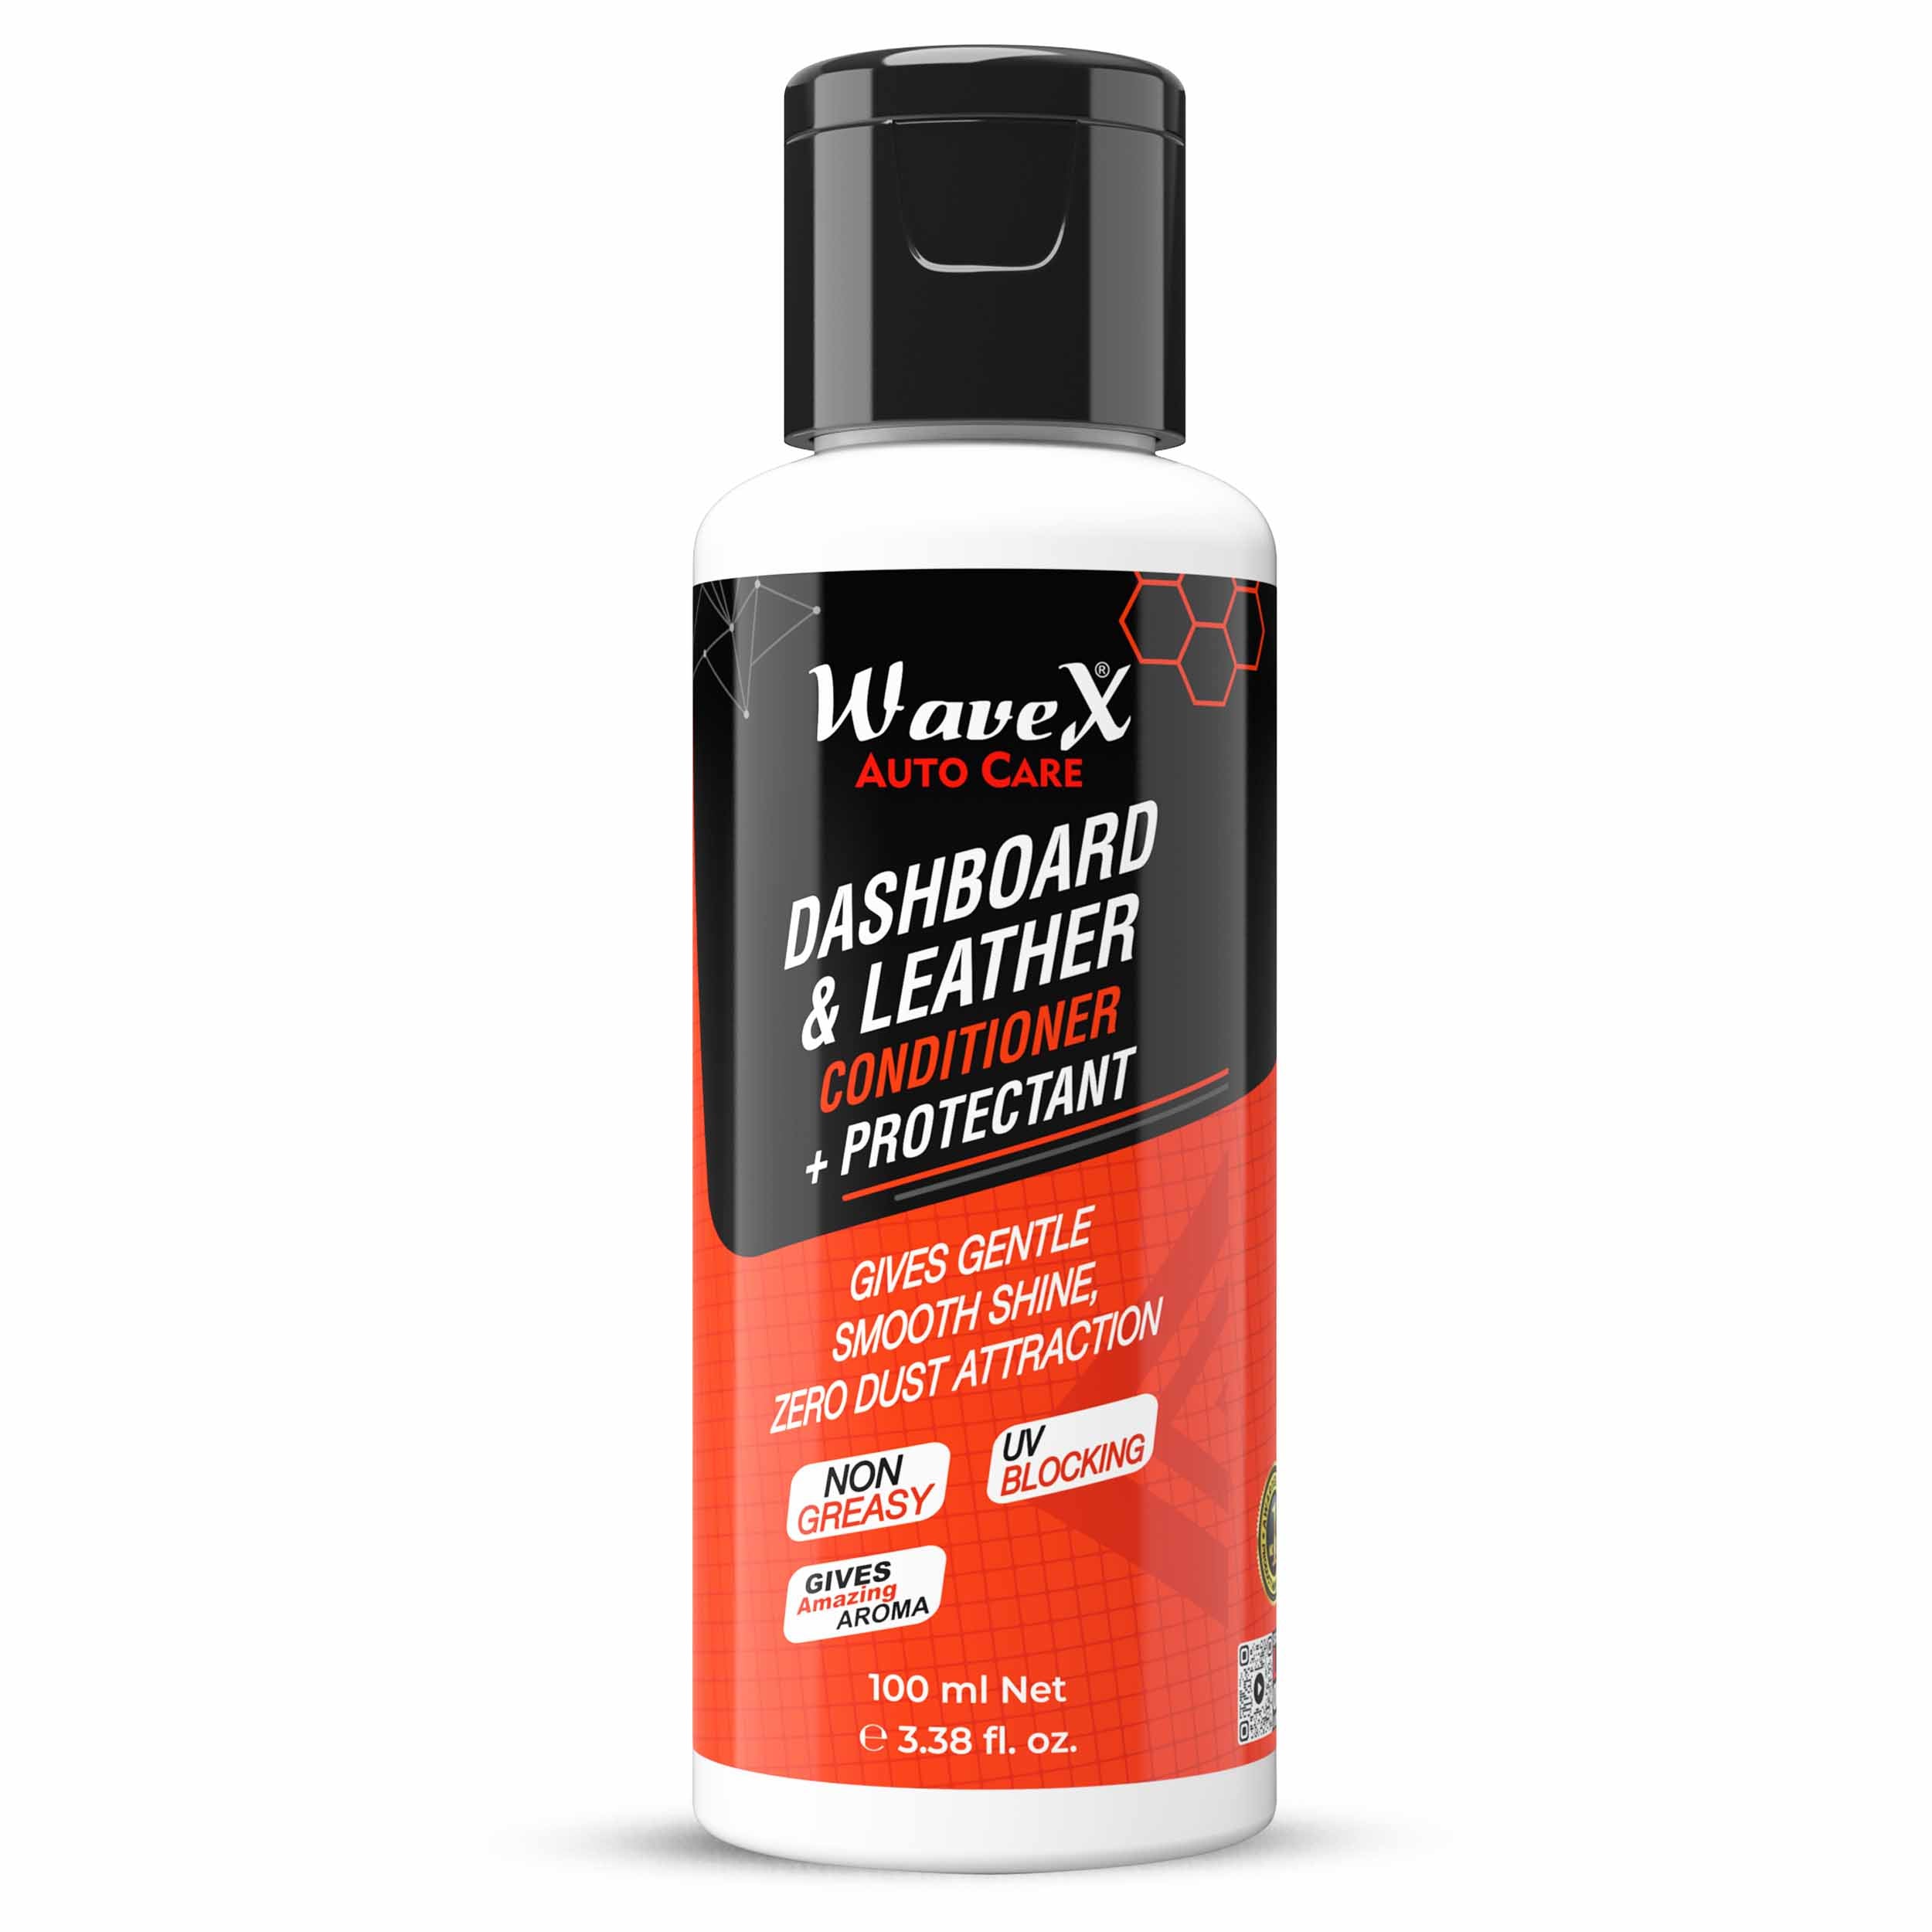 Dashboard Polish and Leather Conditioner + Protectant Car Dashboard Polish 100ml | Dashboard Polish that Protects, Shines & Conditions